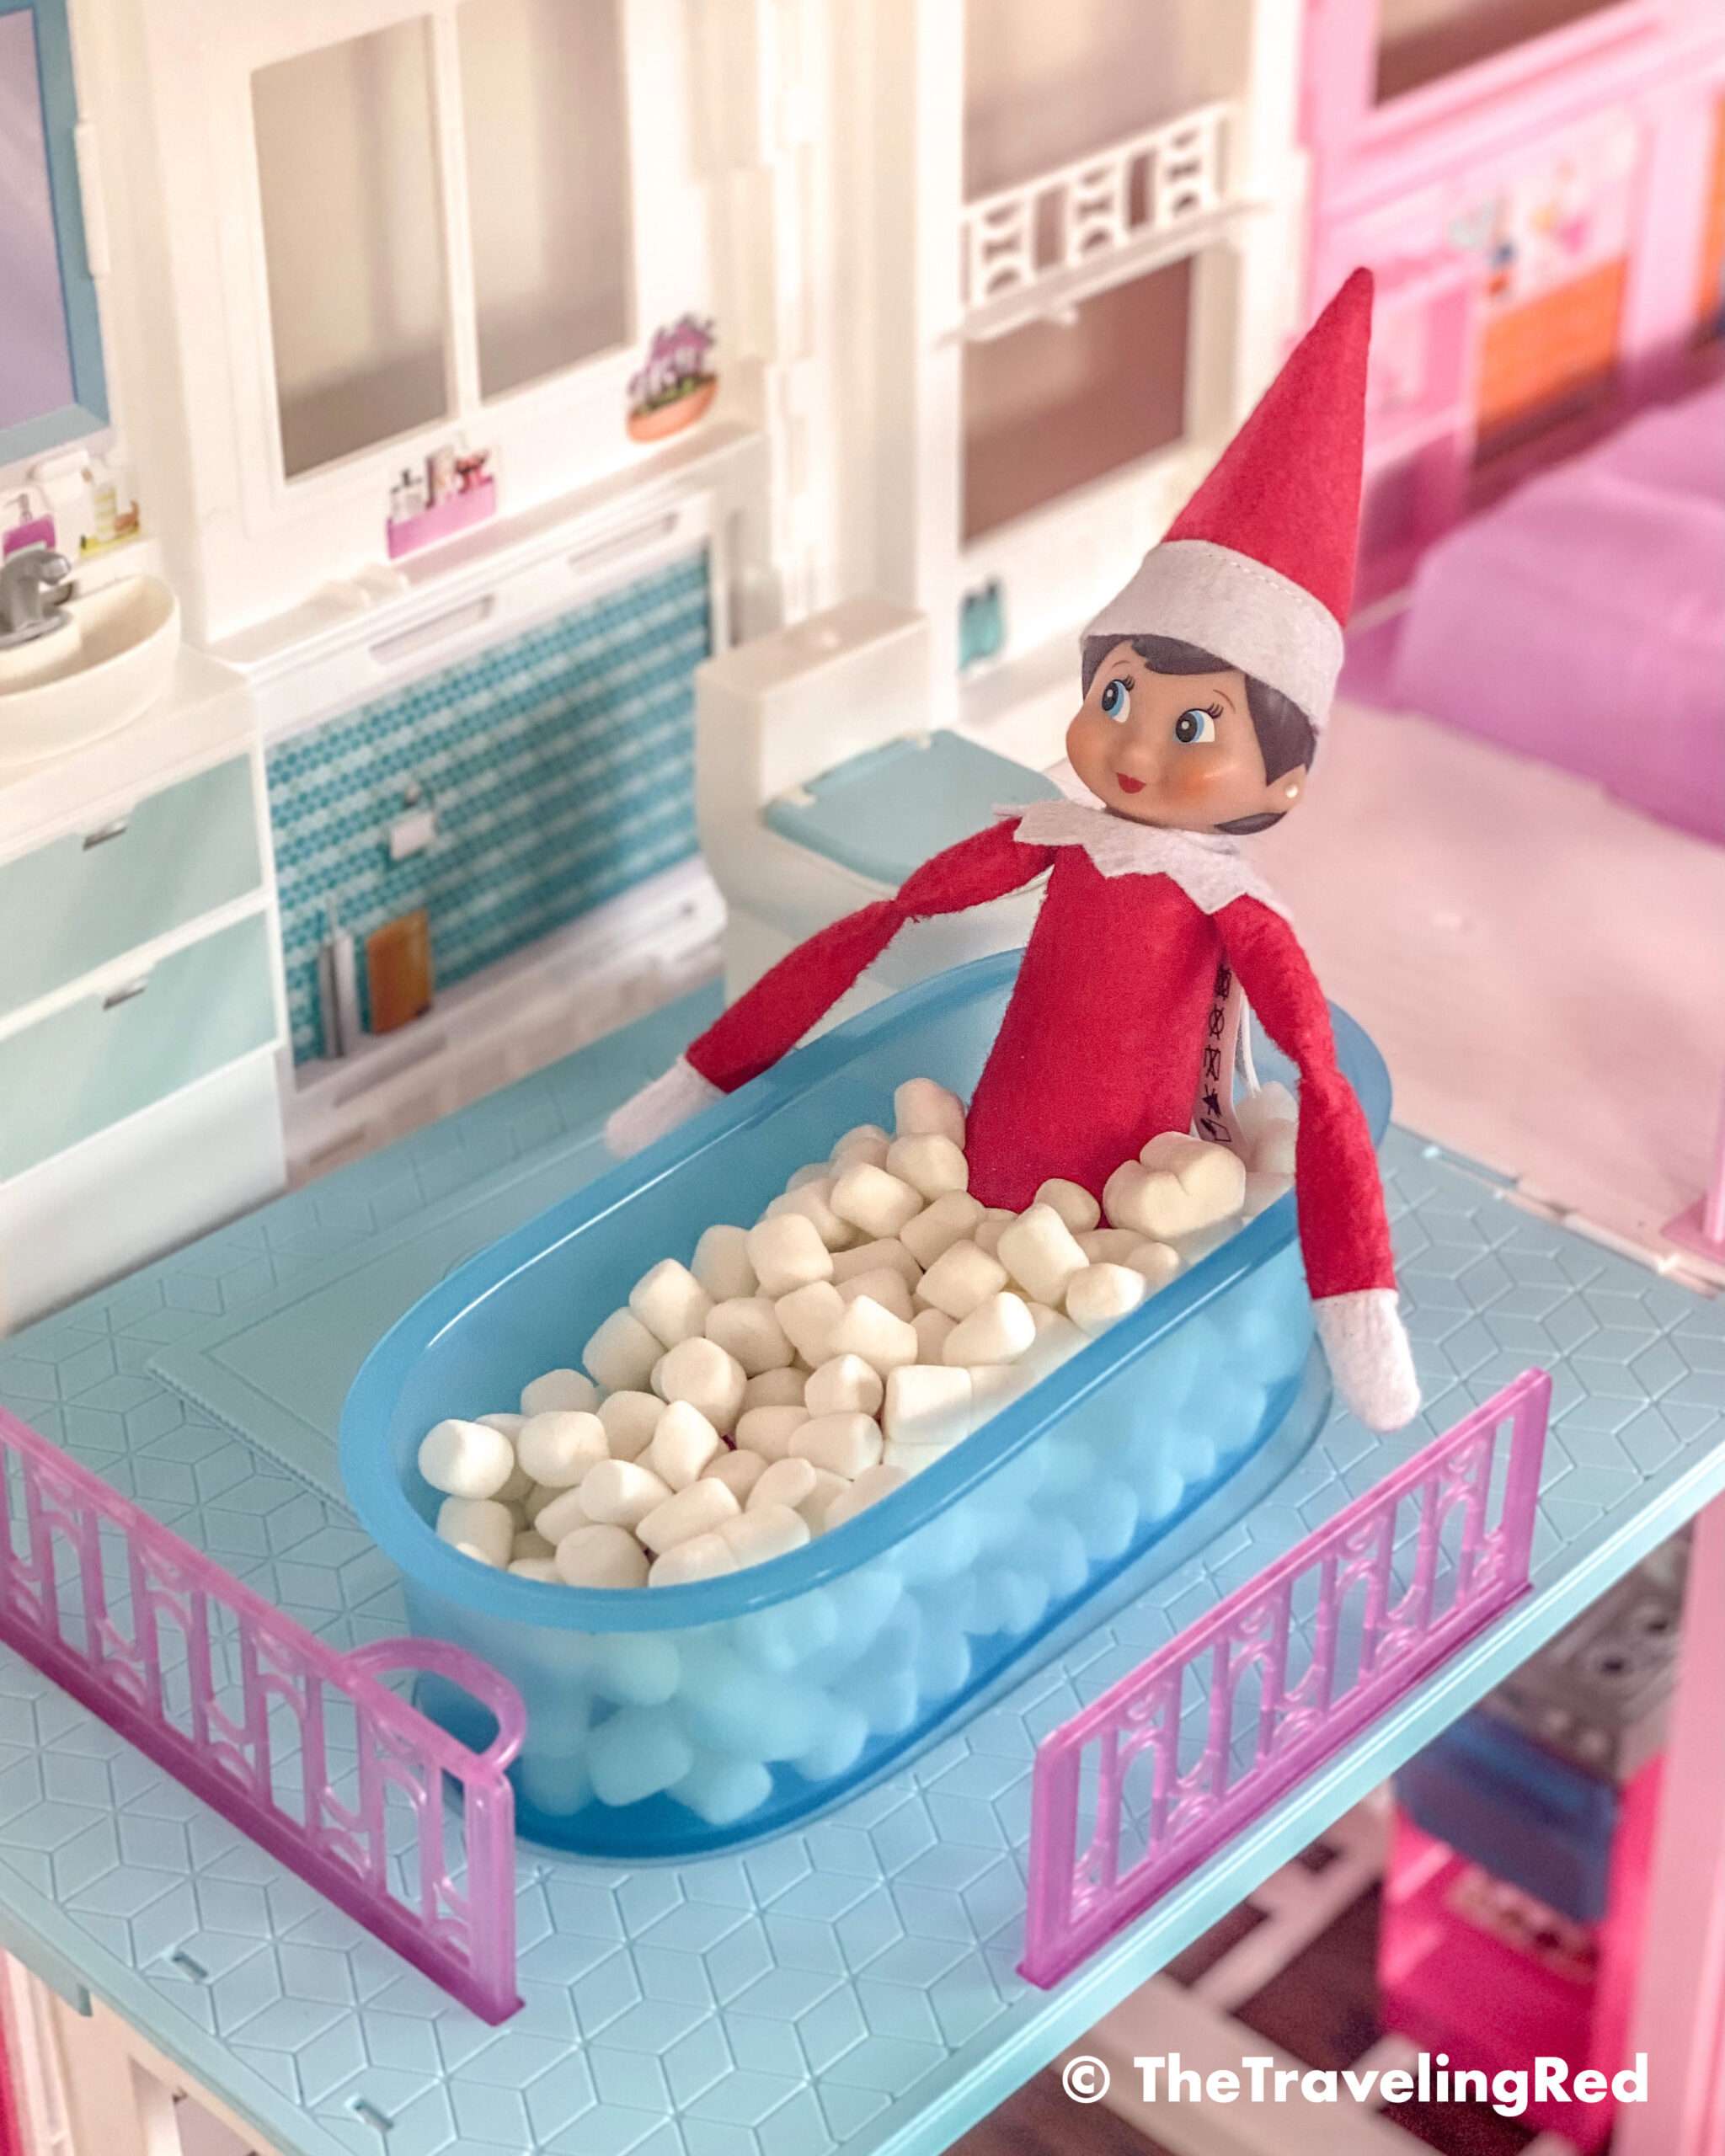 Naughty Elf on the shelf had a bubble bath in the barbie house tub using mini marshmallows. Fun and easy elf on the shelf ideas for a naughty elf that are quick and easy using things you have at home.